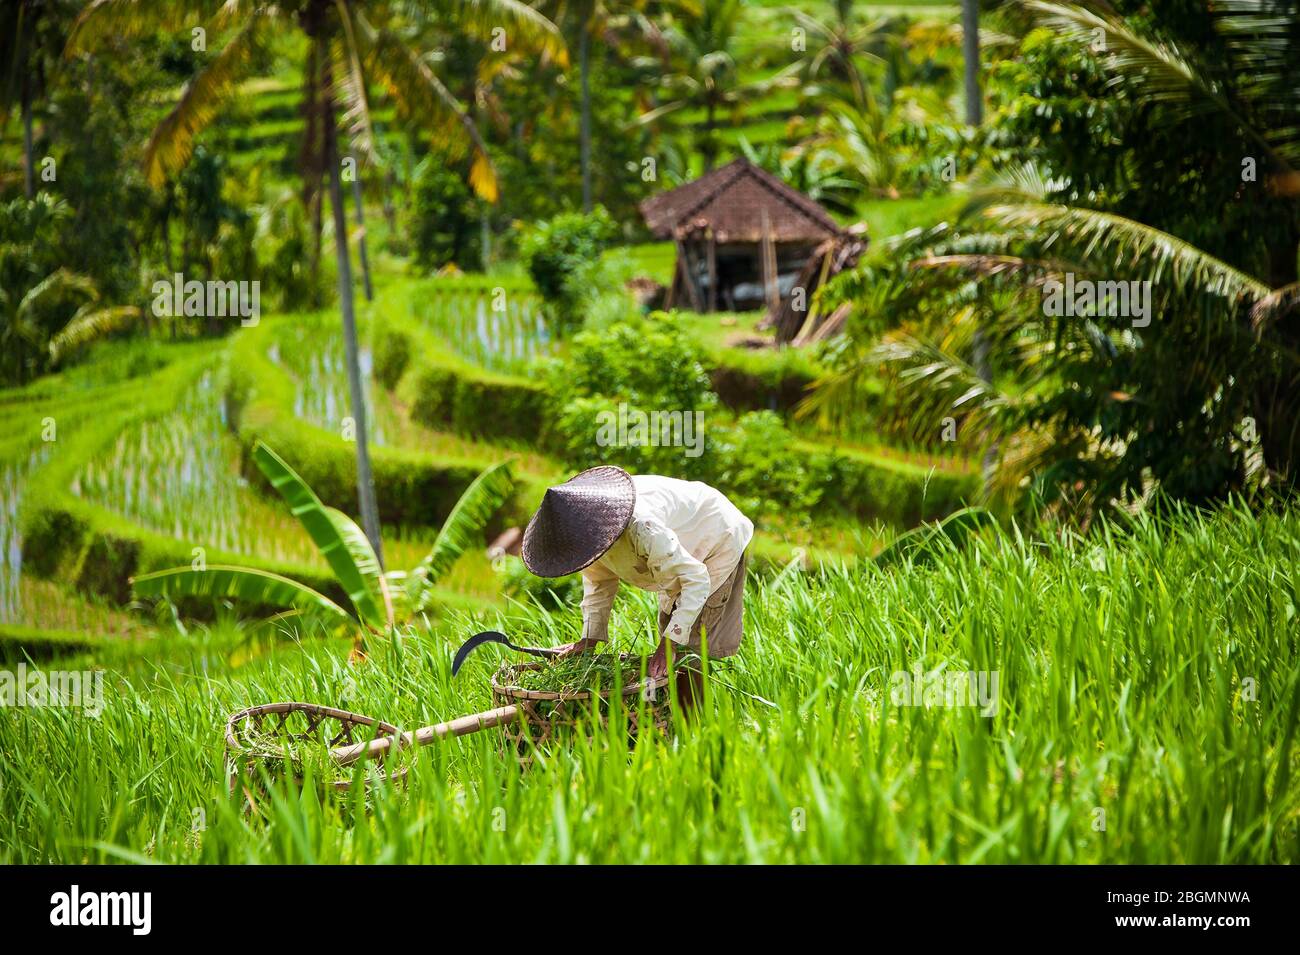 Rice farmer harvesting the crop, Jatiluwih  Rice Terraces, Bali Indonesia. Close up worker filling bamboo baskets  on sunny slopes Stock Photo